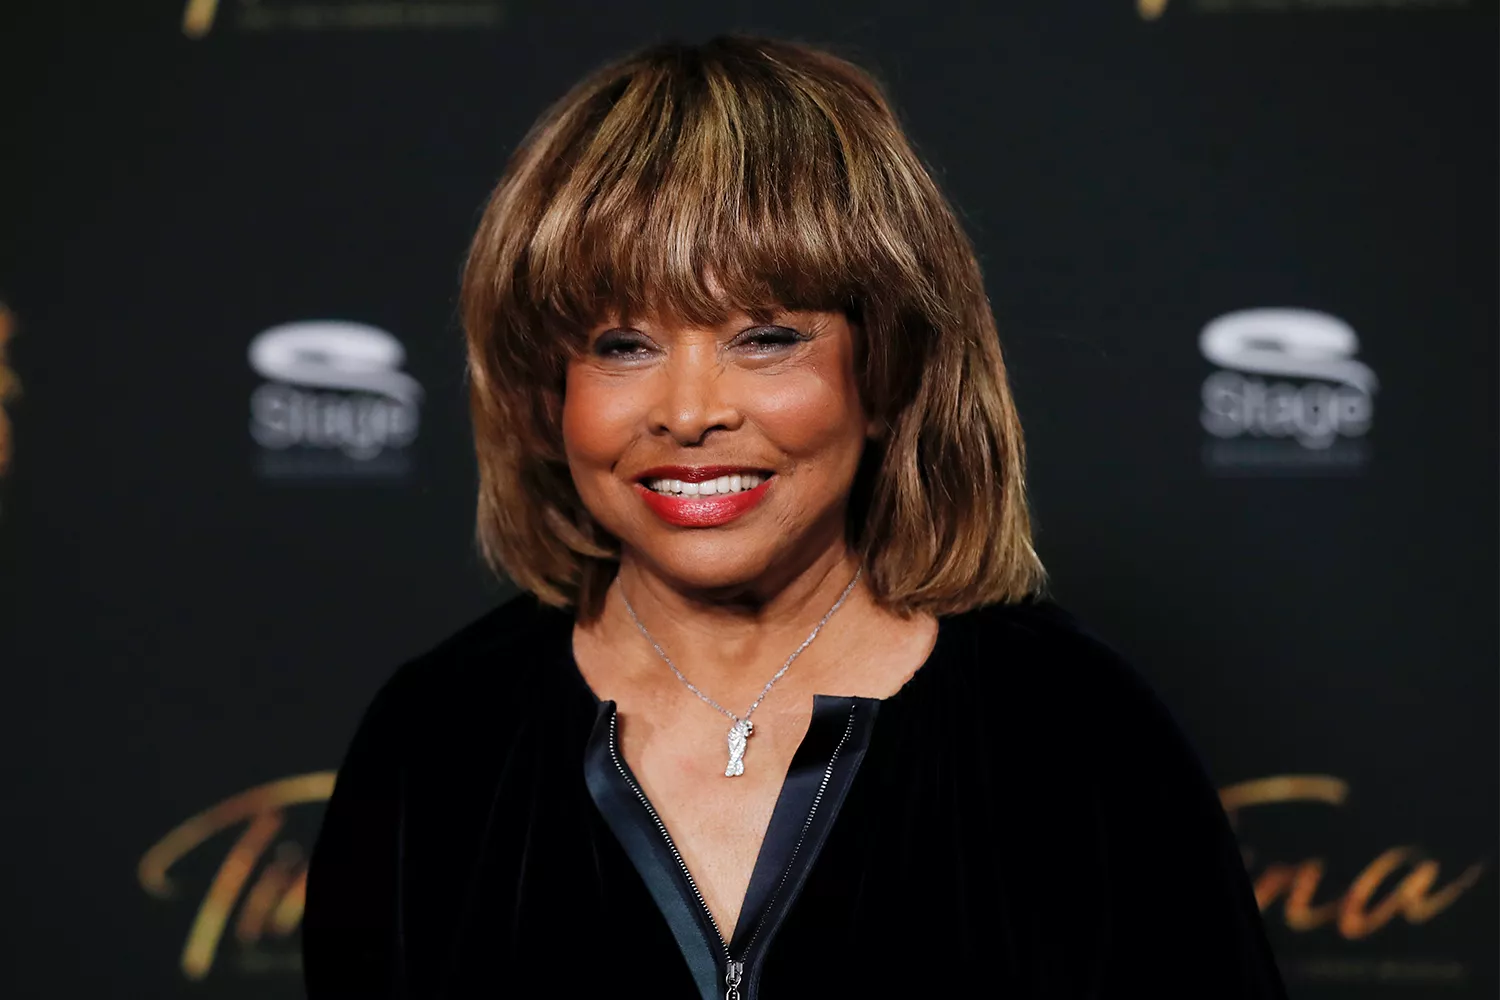 tina turner 6 0524 16032b56615f434790466130d6f71876 - WTX News Breaking News, fashion & Culture from around the World - Daily News Briefings -Finance, Business, Politics & Sports News